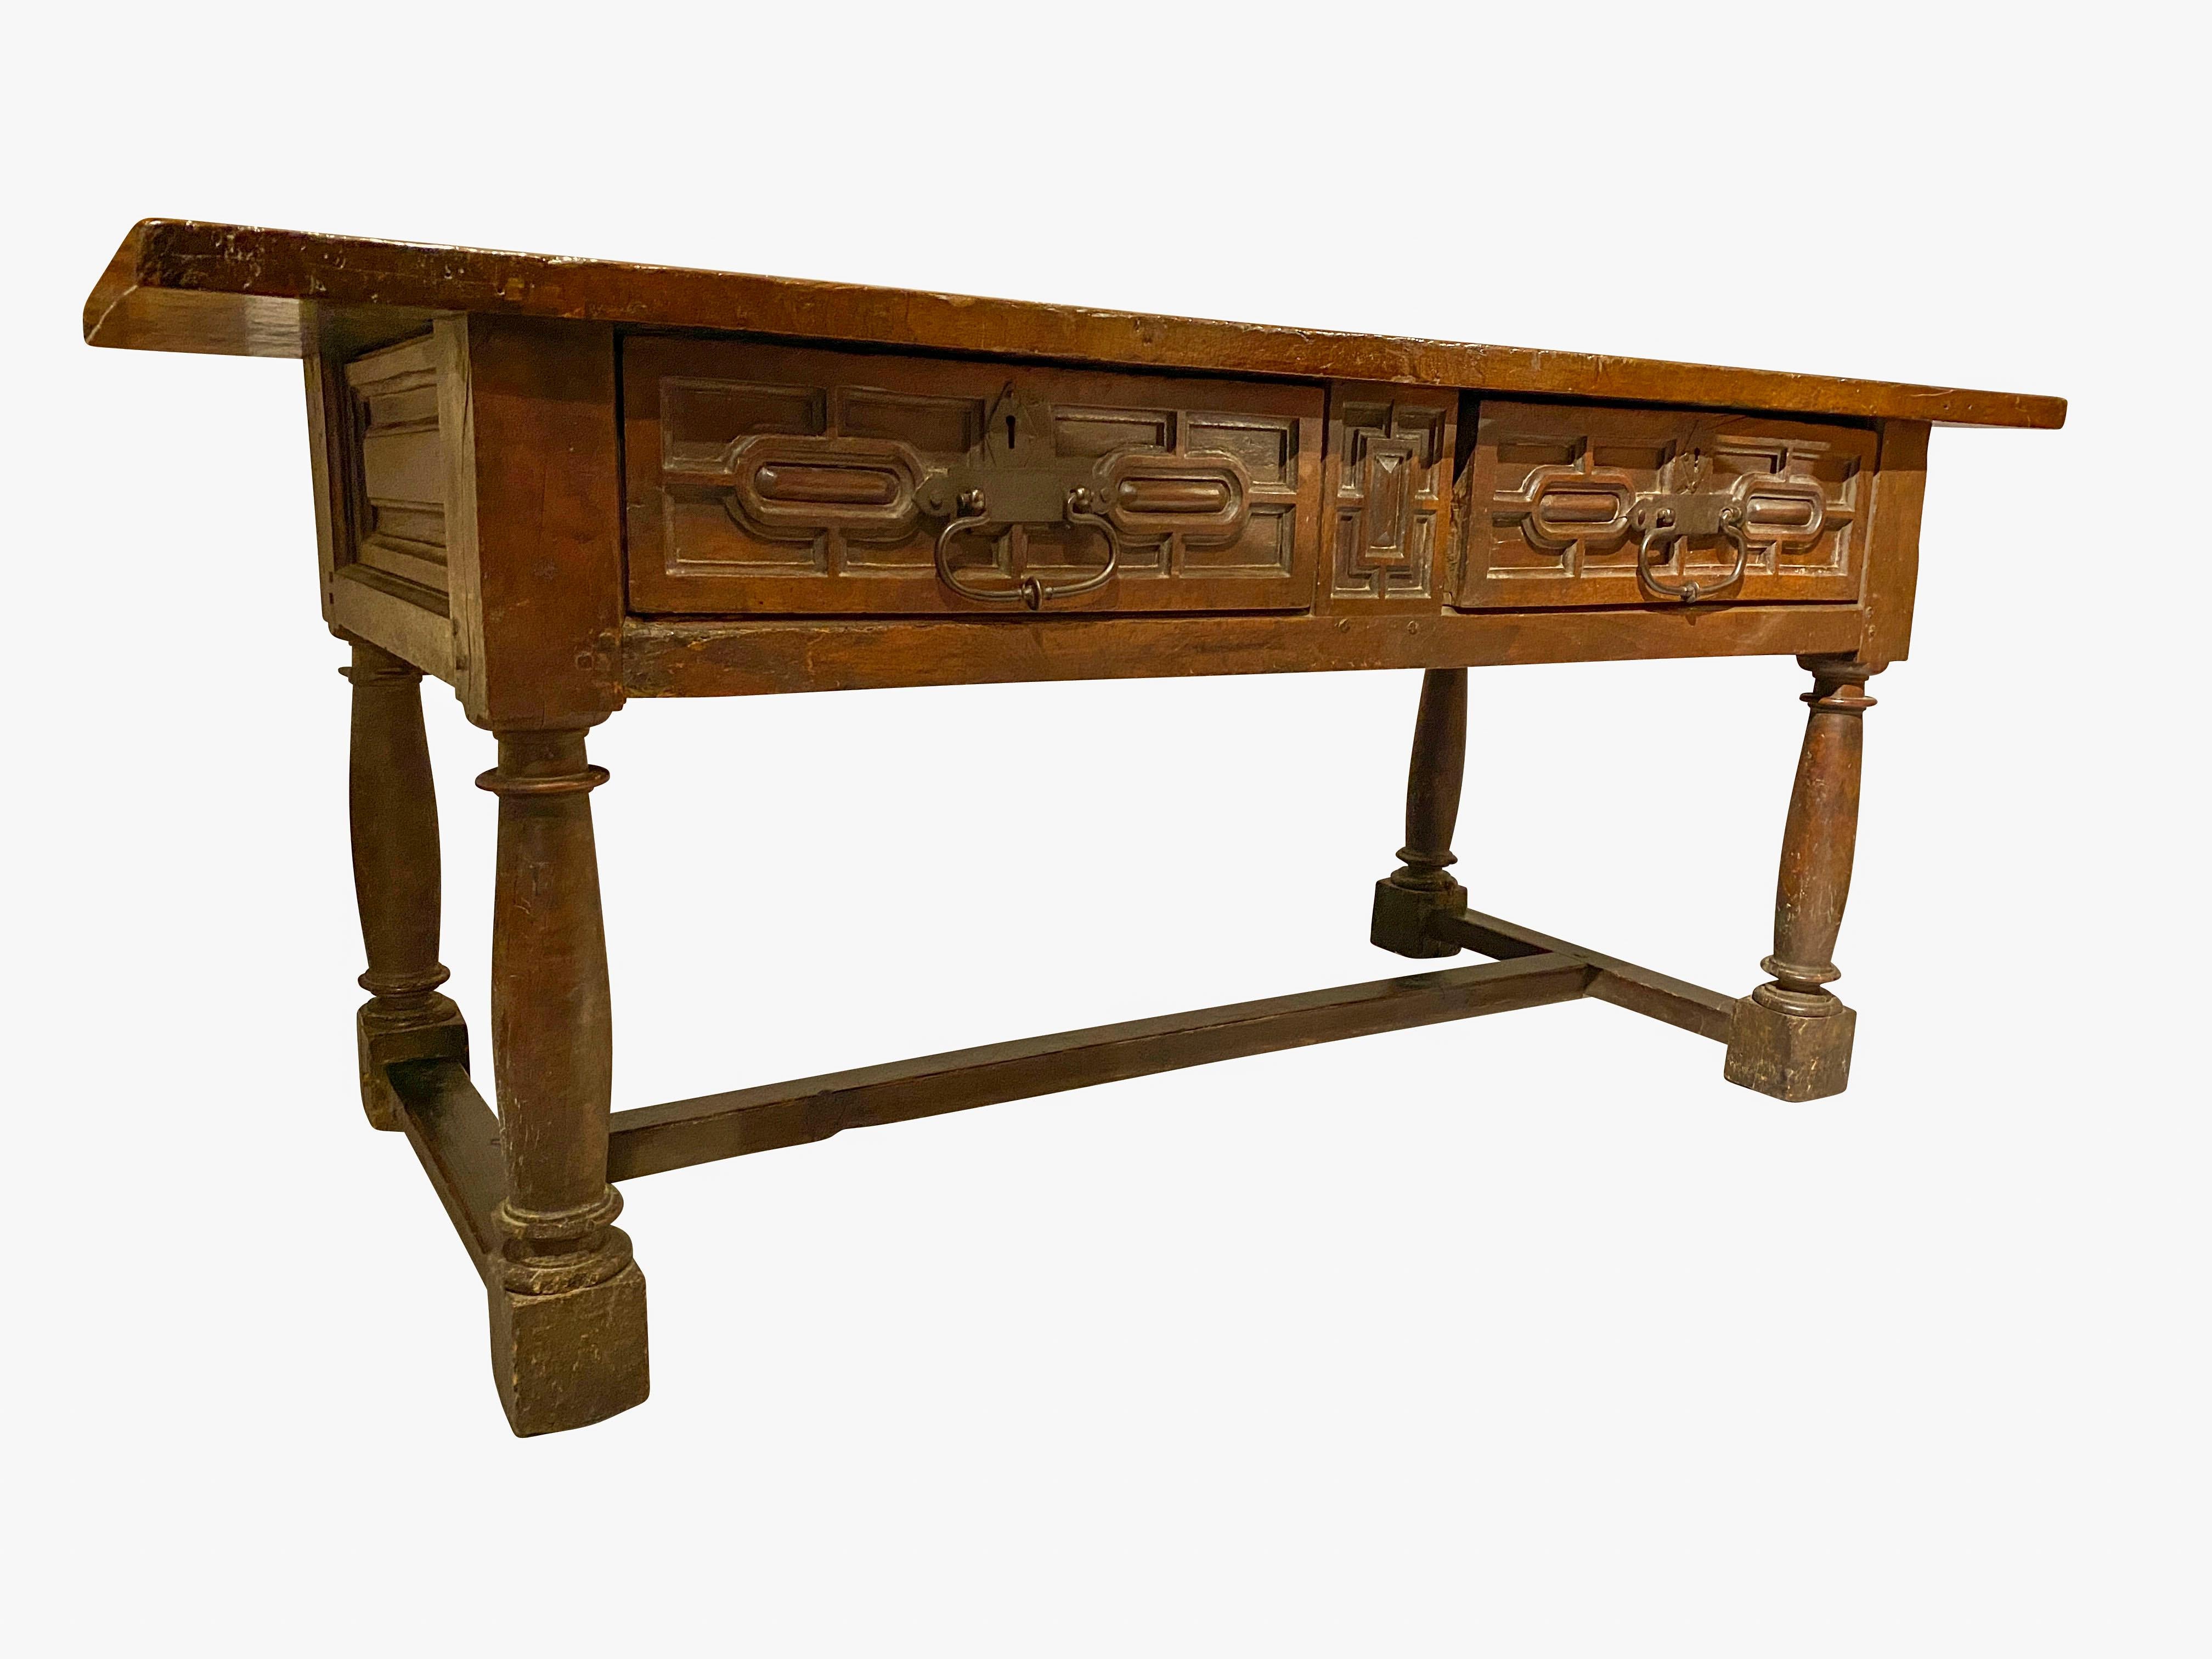 With a thick single board top over two carved panelled drawers flanking a geometric form panel, the drawers with nicely wrought iron handles and escutcheons, panelled sides, raised on turned legs joined by an H form stretcher.